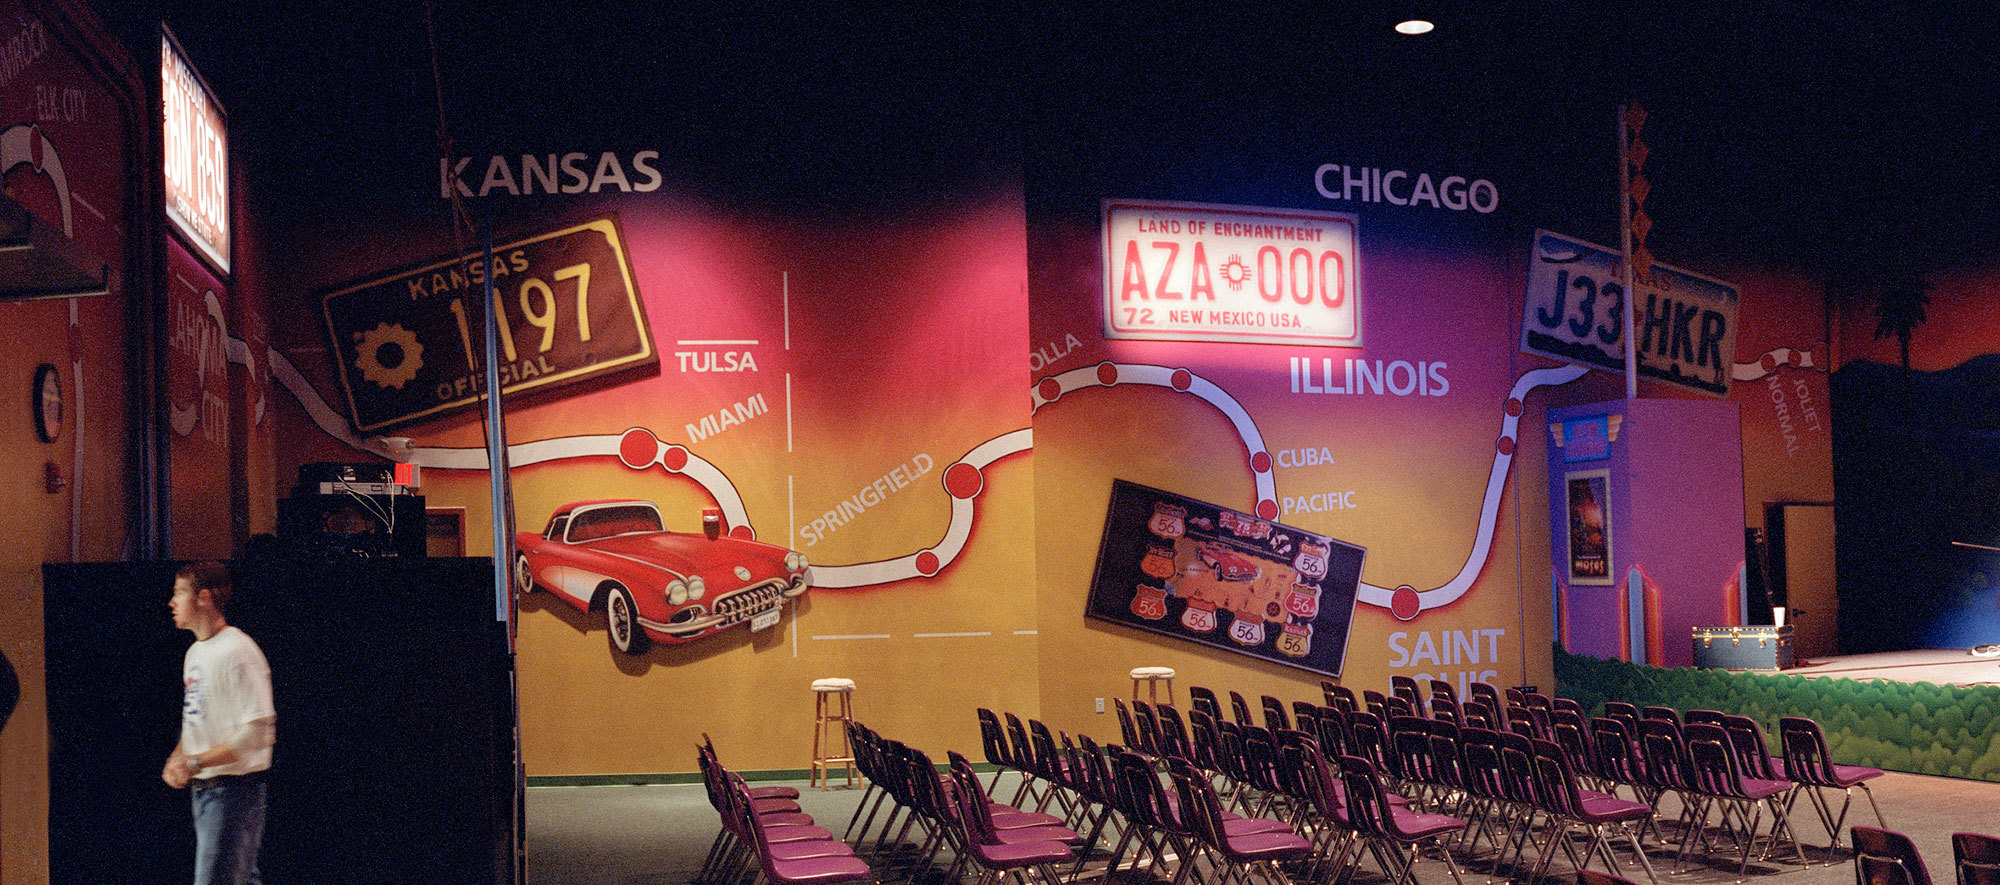 Travel License Plate Themed Sound Panels on a wall mural of a map with city names and a red 50s corvette car in a Church Auditorium